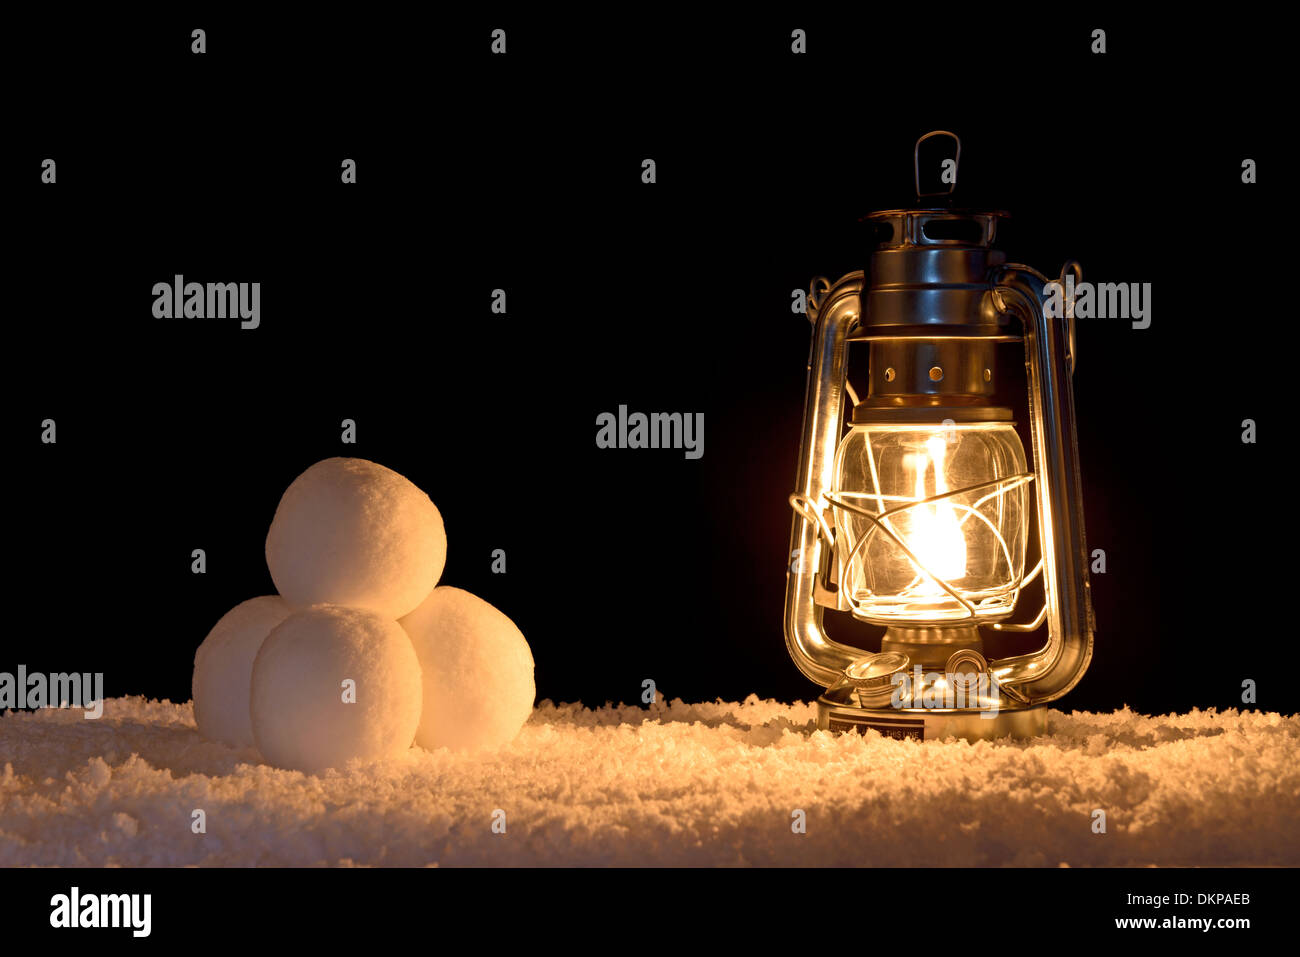 Pile of fake snowballs and snowflakes against a blue background Stock Photo  - Alamy